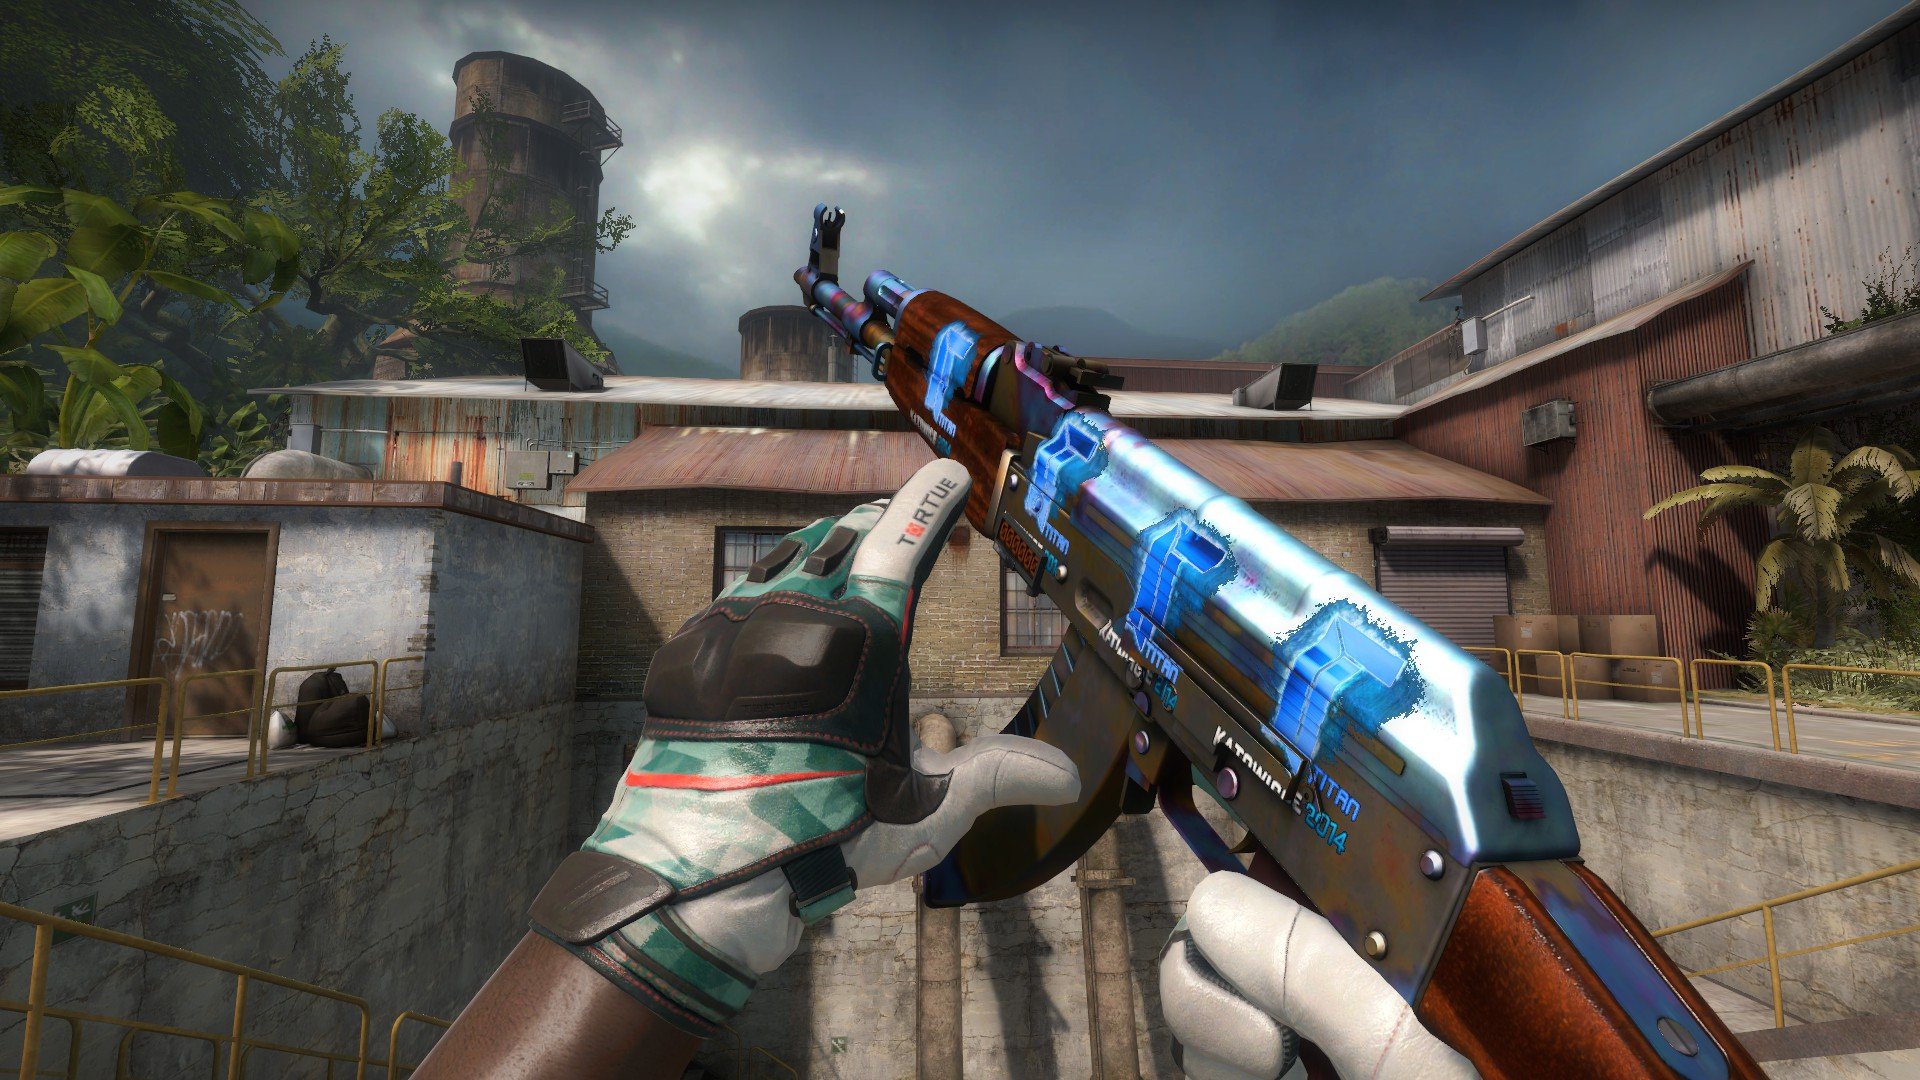 Chinese collector buys a skin for an AK-47 in CS:GO for $400,000